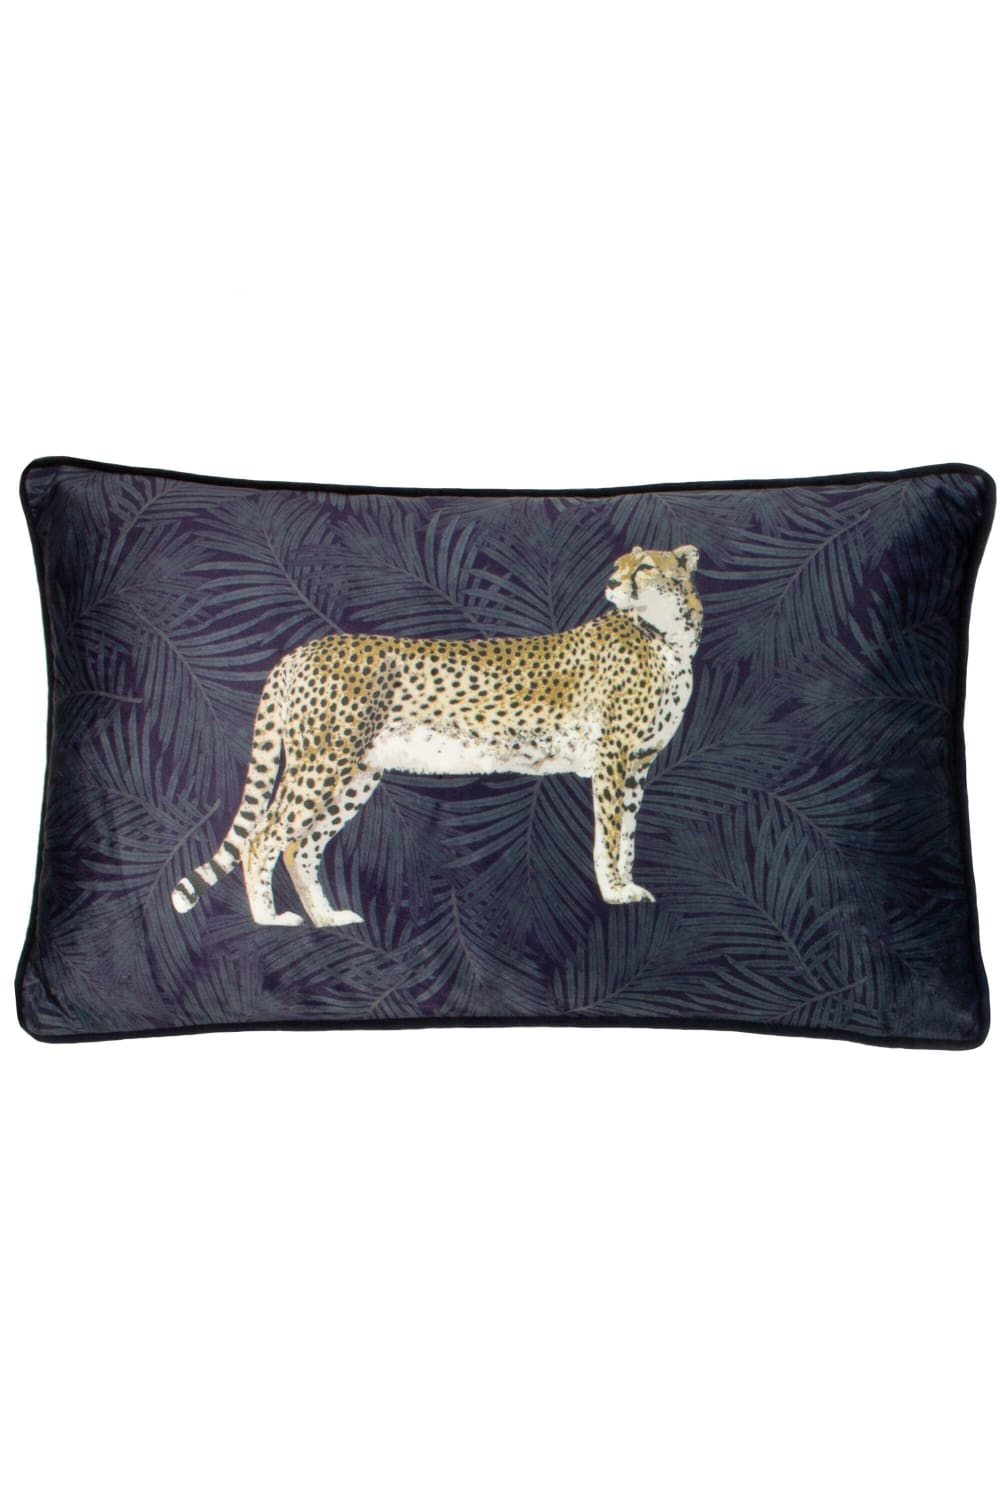 Paoletti Cheetah Forest Throw Pillow Cover (Navy) (One Size)